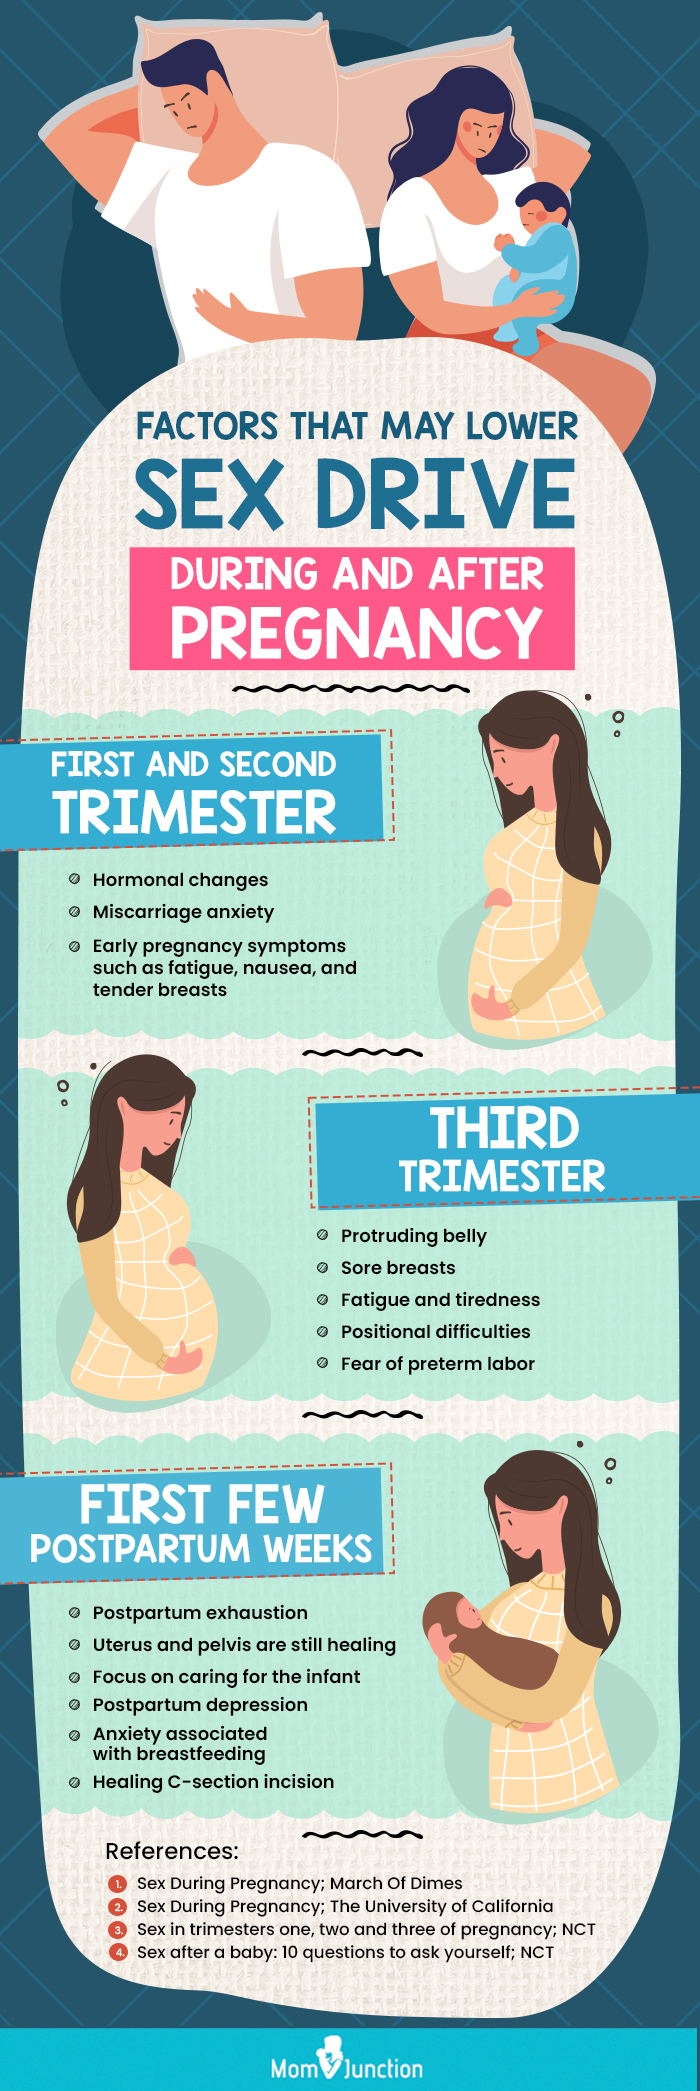 factors that may lower sex drive during and after pregnancy (infographic)